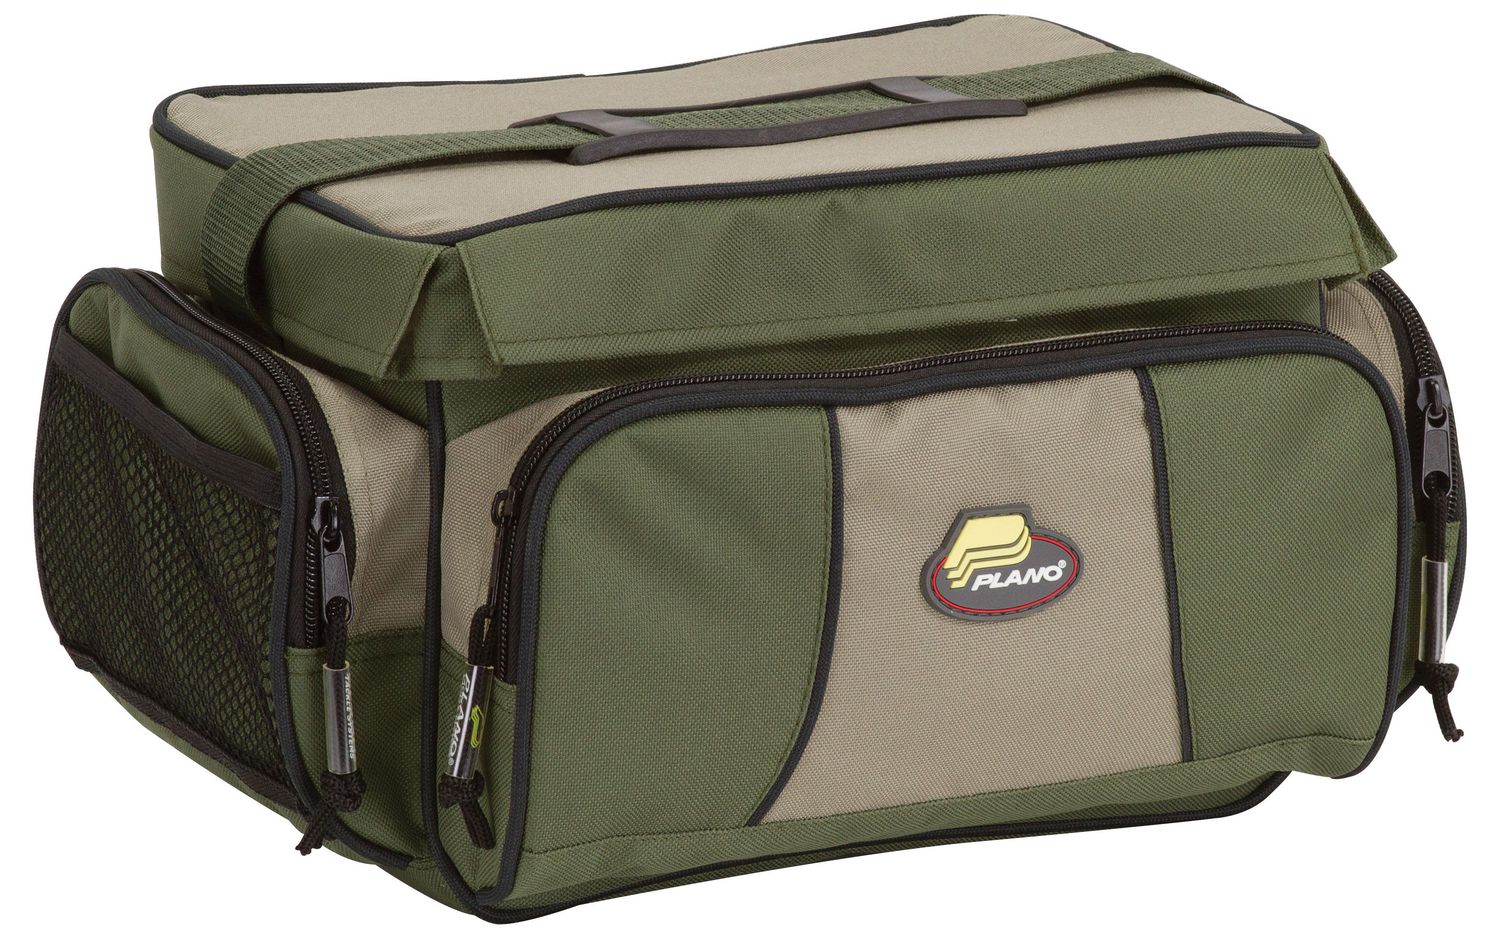 Plano Molding Soft Sider Fishouflage Tackle Bag - Best for the Outdoors Dad